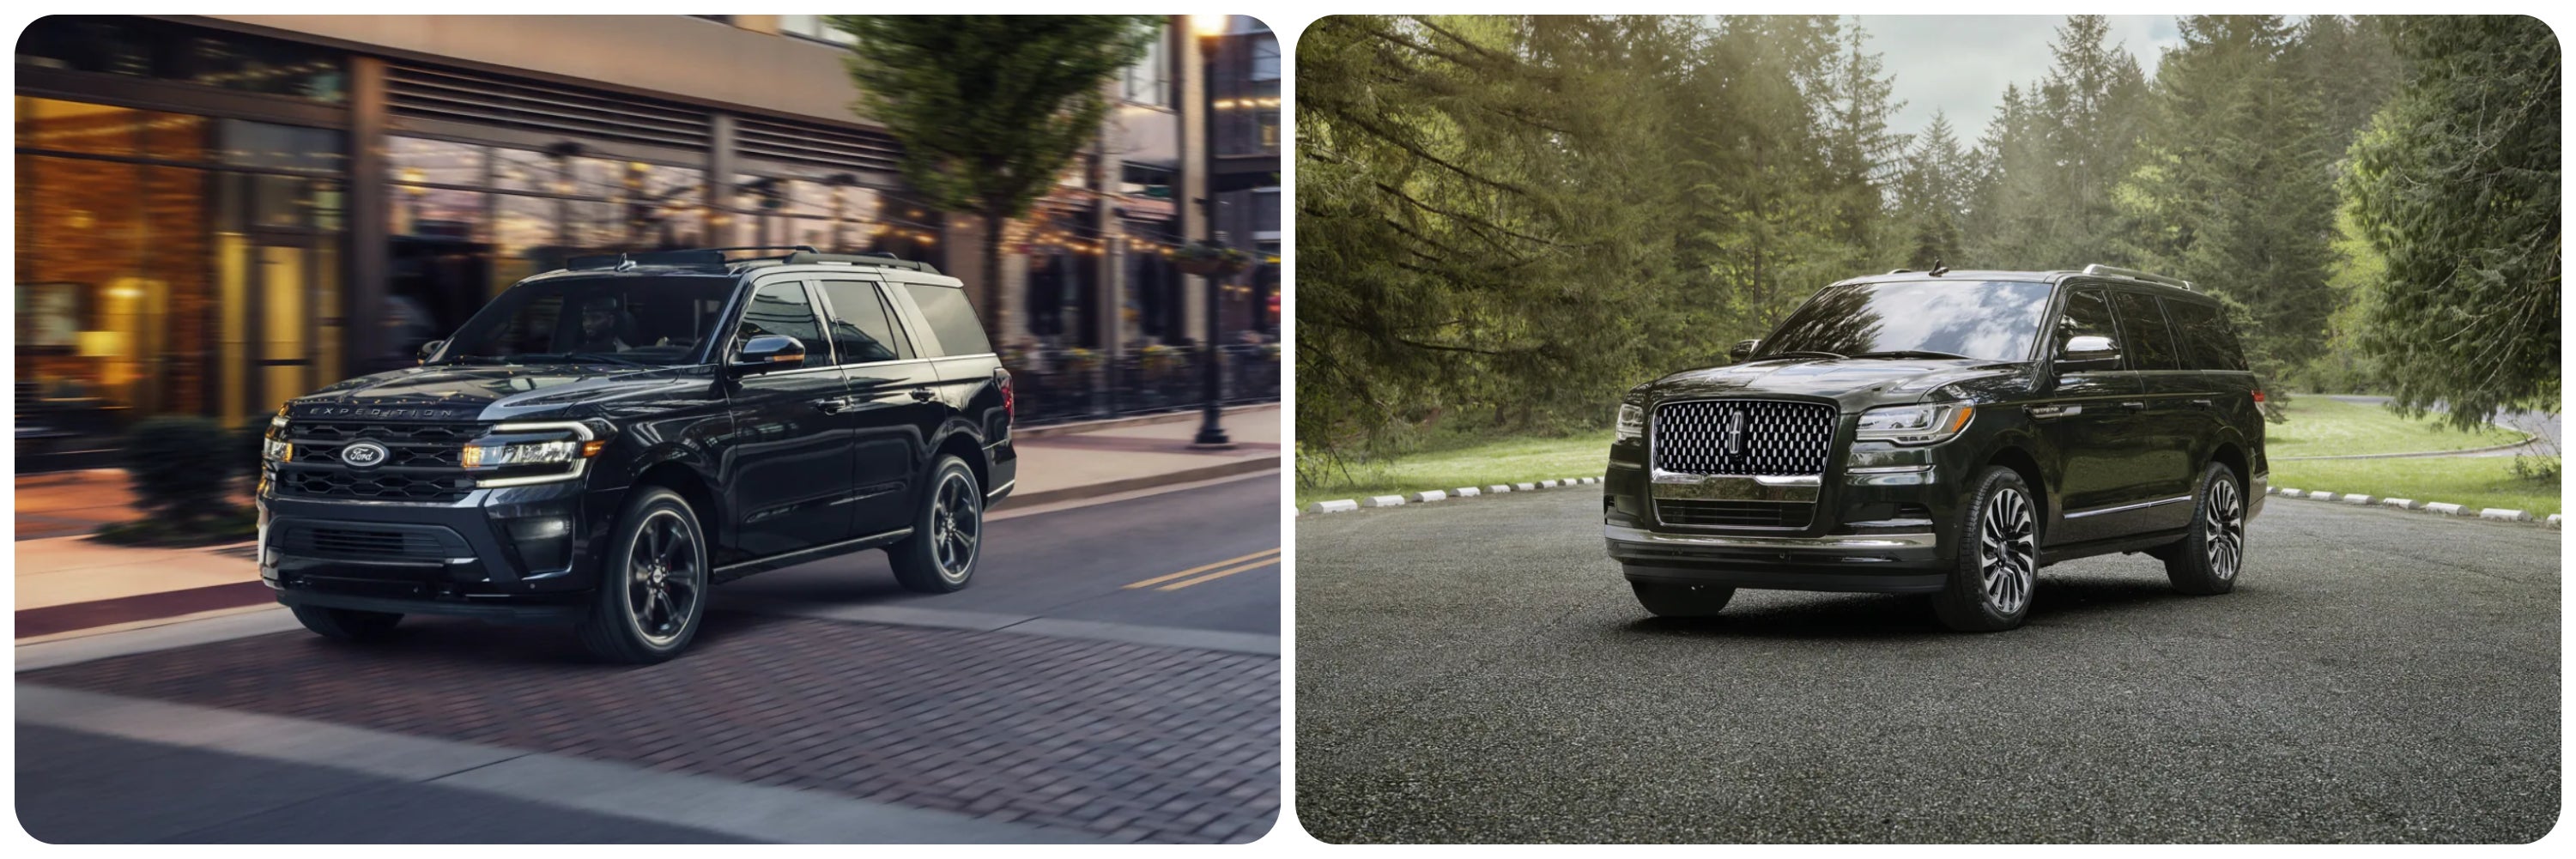 On the left a 2023 Ford Explorer and on the right a 2023 Lincoln Navigator is shown - both in profile view.